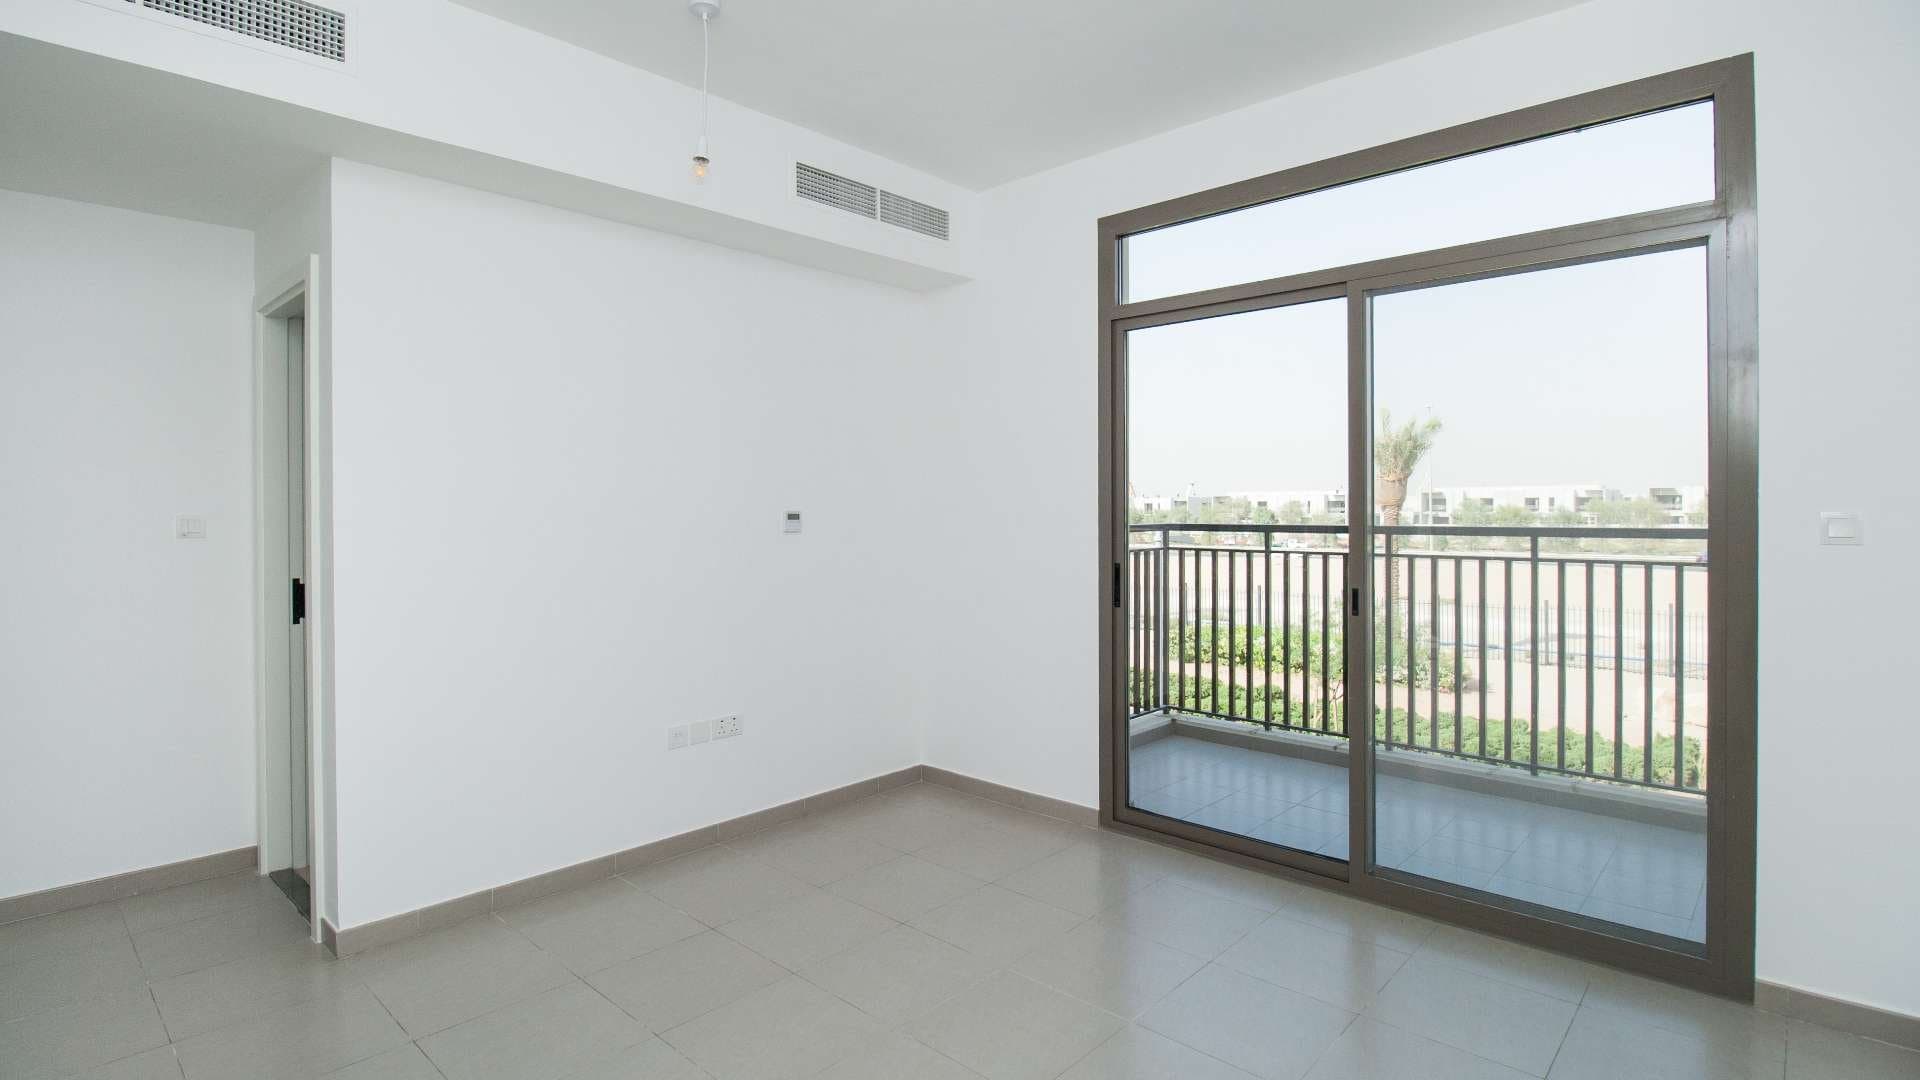 3 Bedroom Townhouse For Sale Safi Townhouses Lp07990 18207595fcd03900.jpg